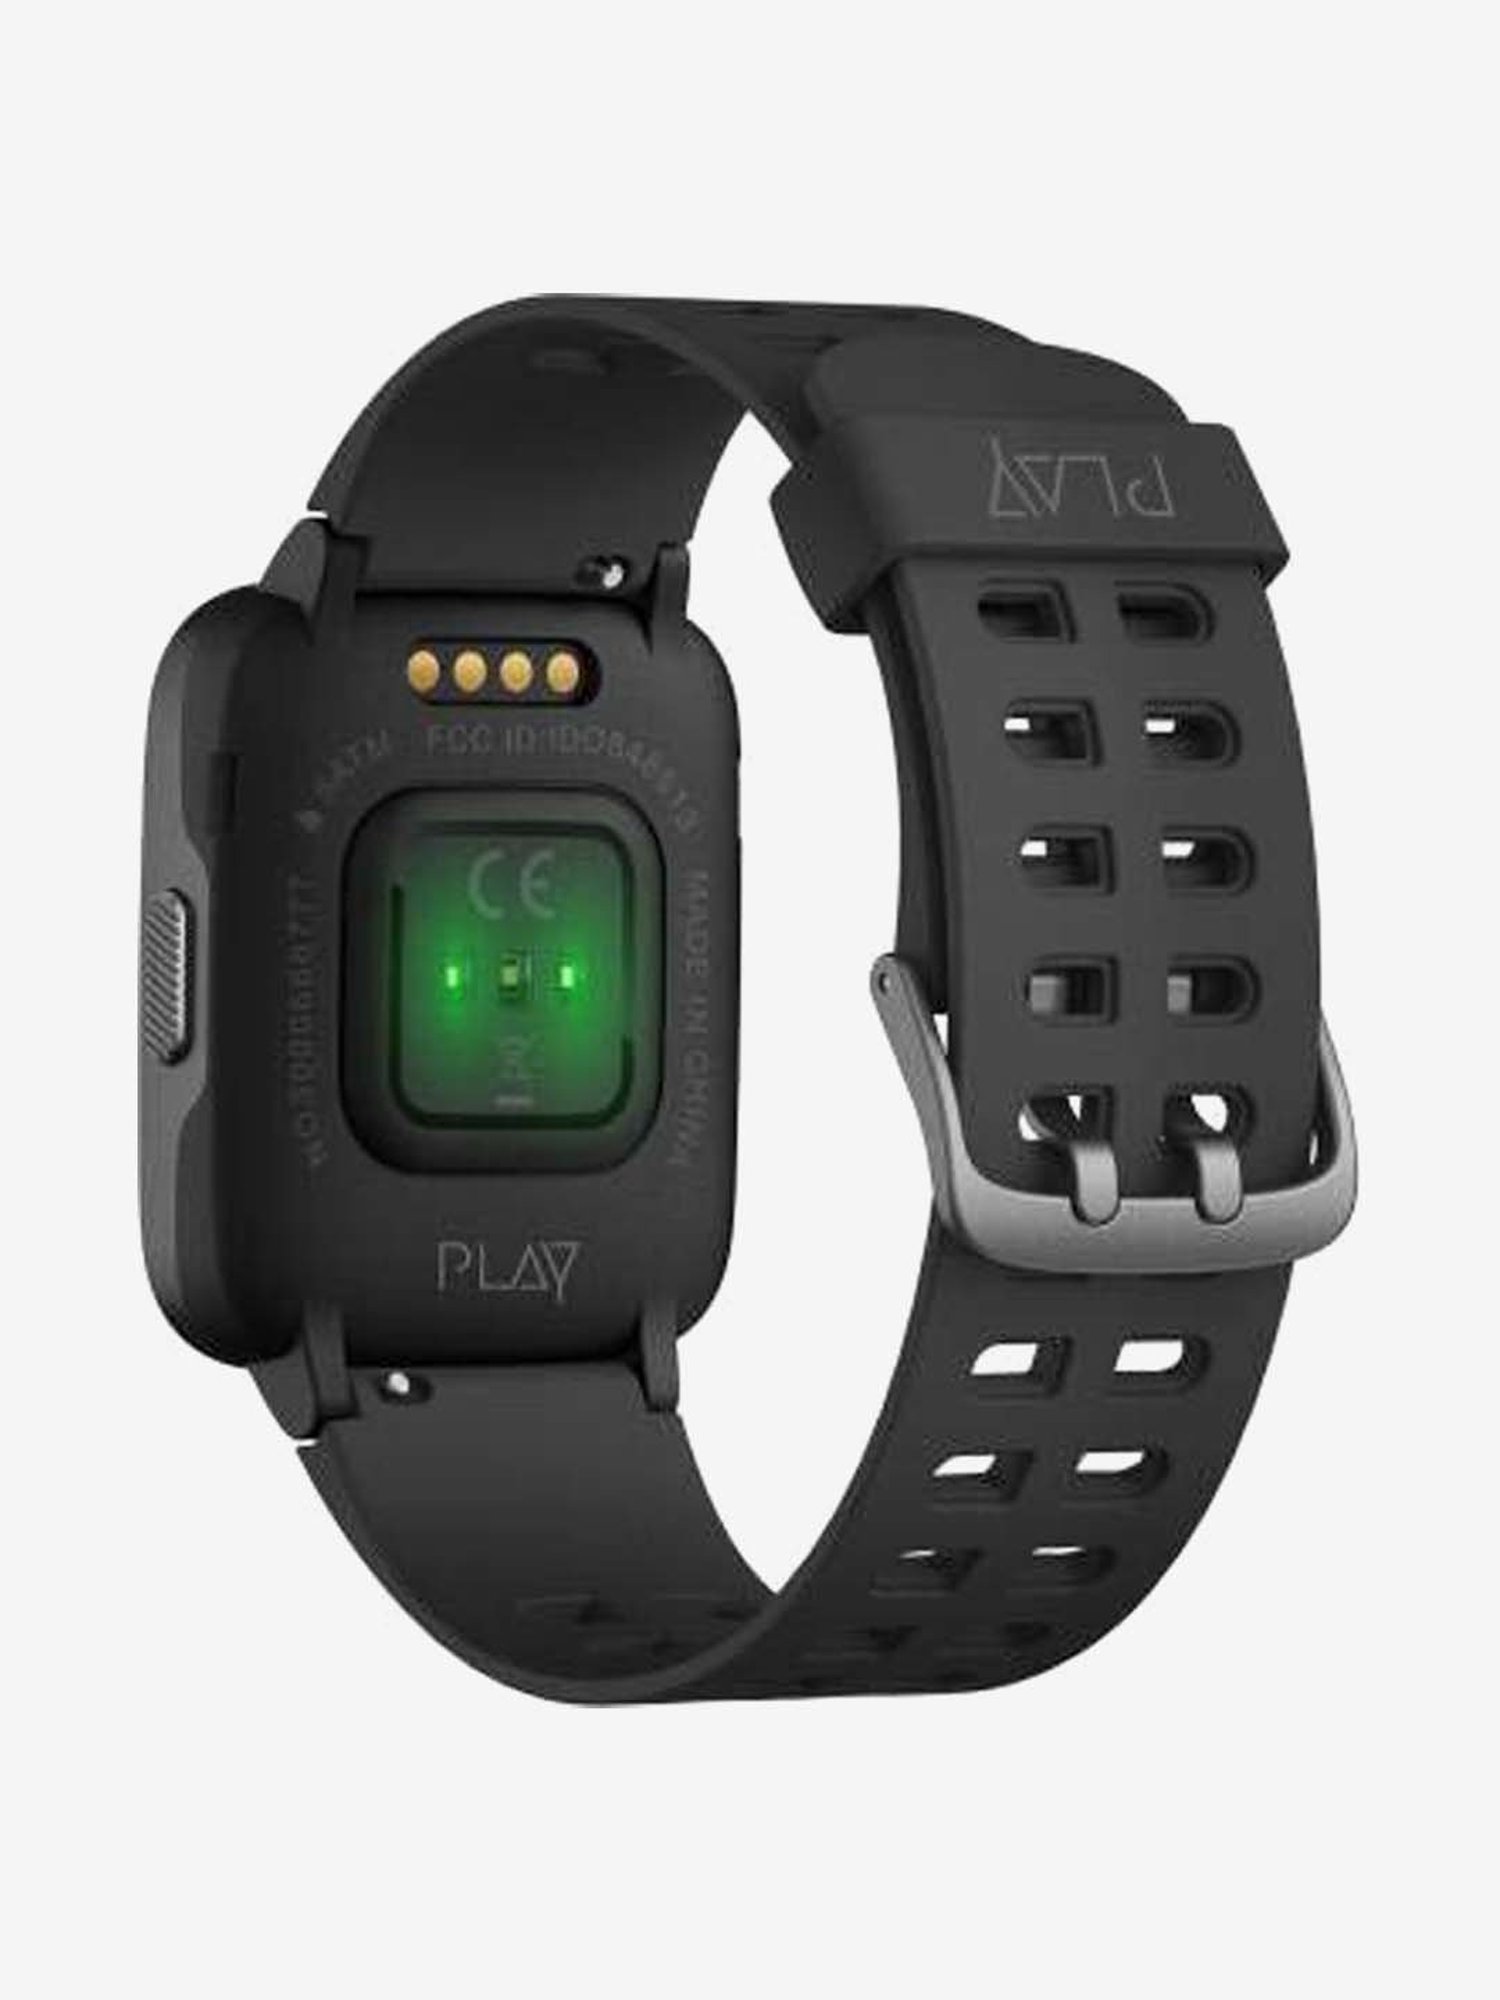 Xplora X5 Play Unisex Smart Watch Cell Phone with GPS Tracker for Children  - Walmart.com